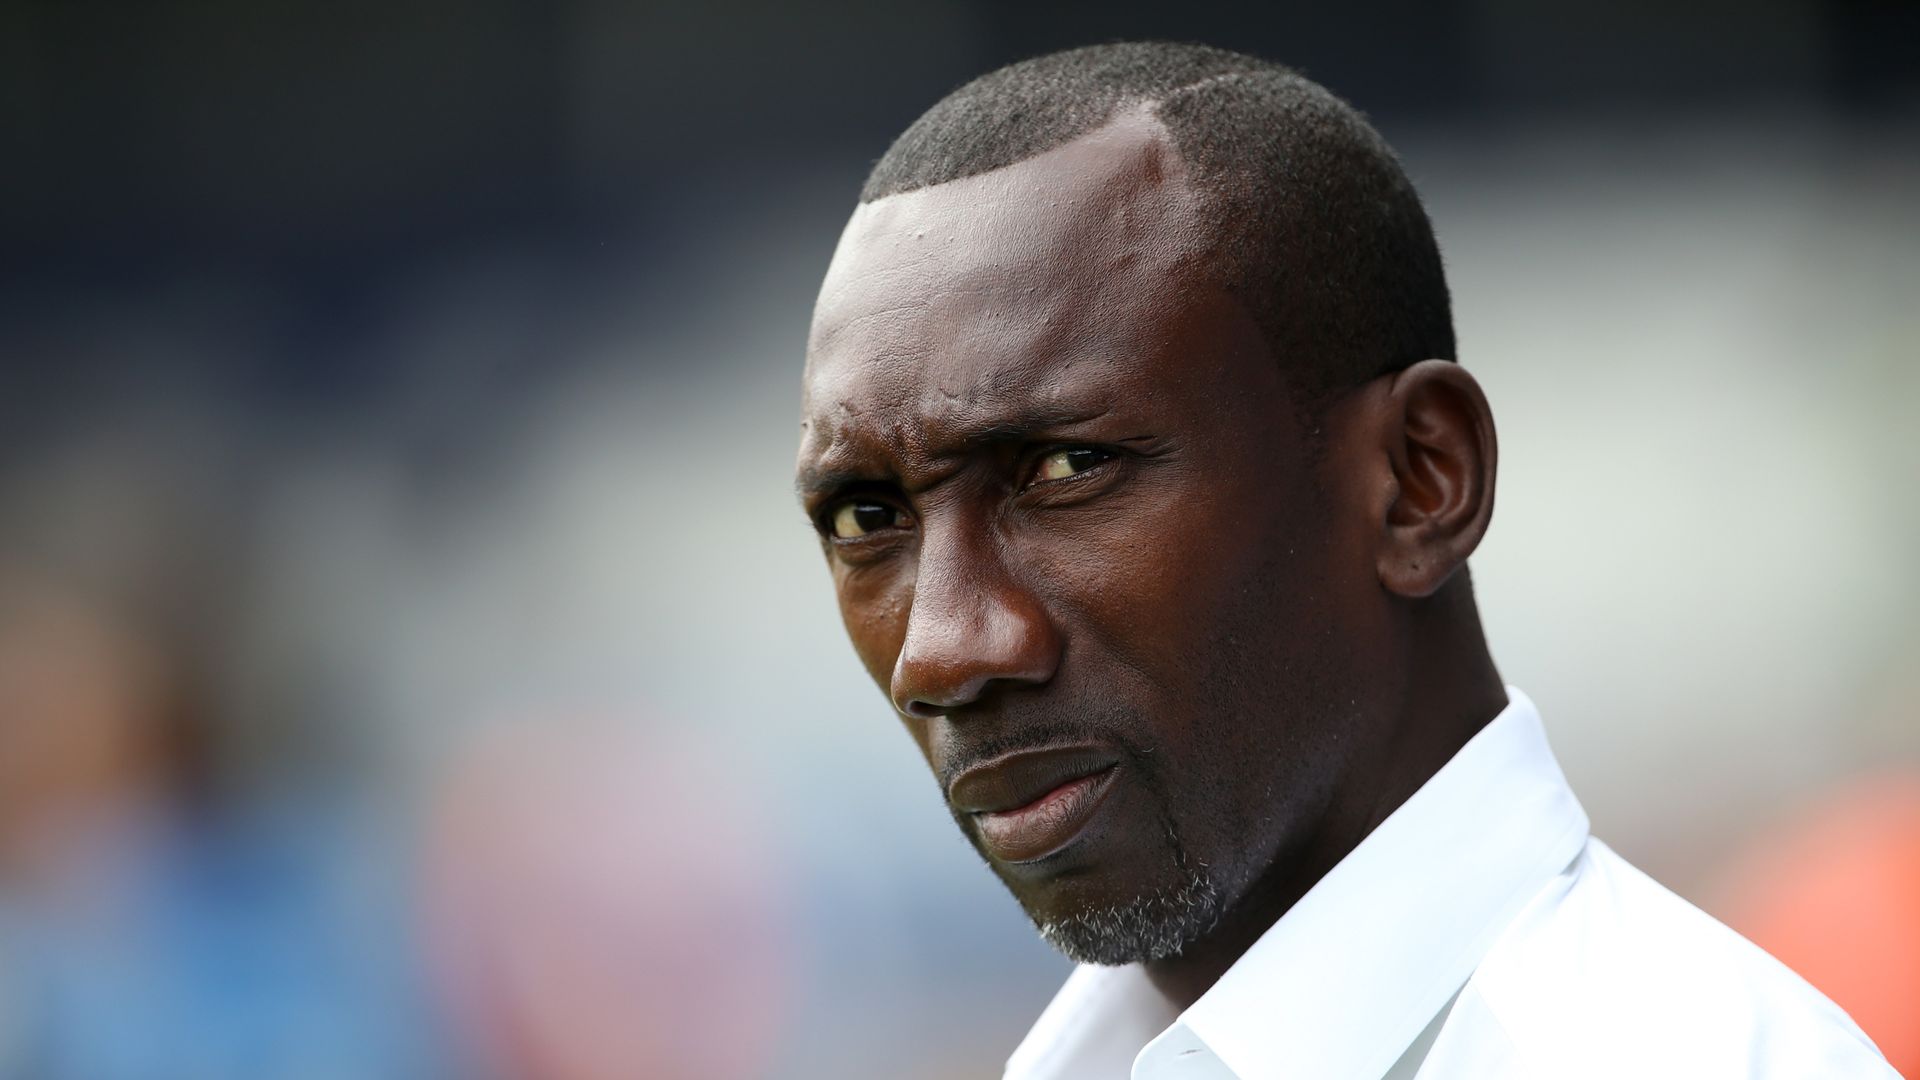 Hasselbaink in talks with FA to join Southgate’s England coaching team